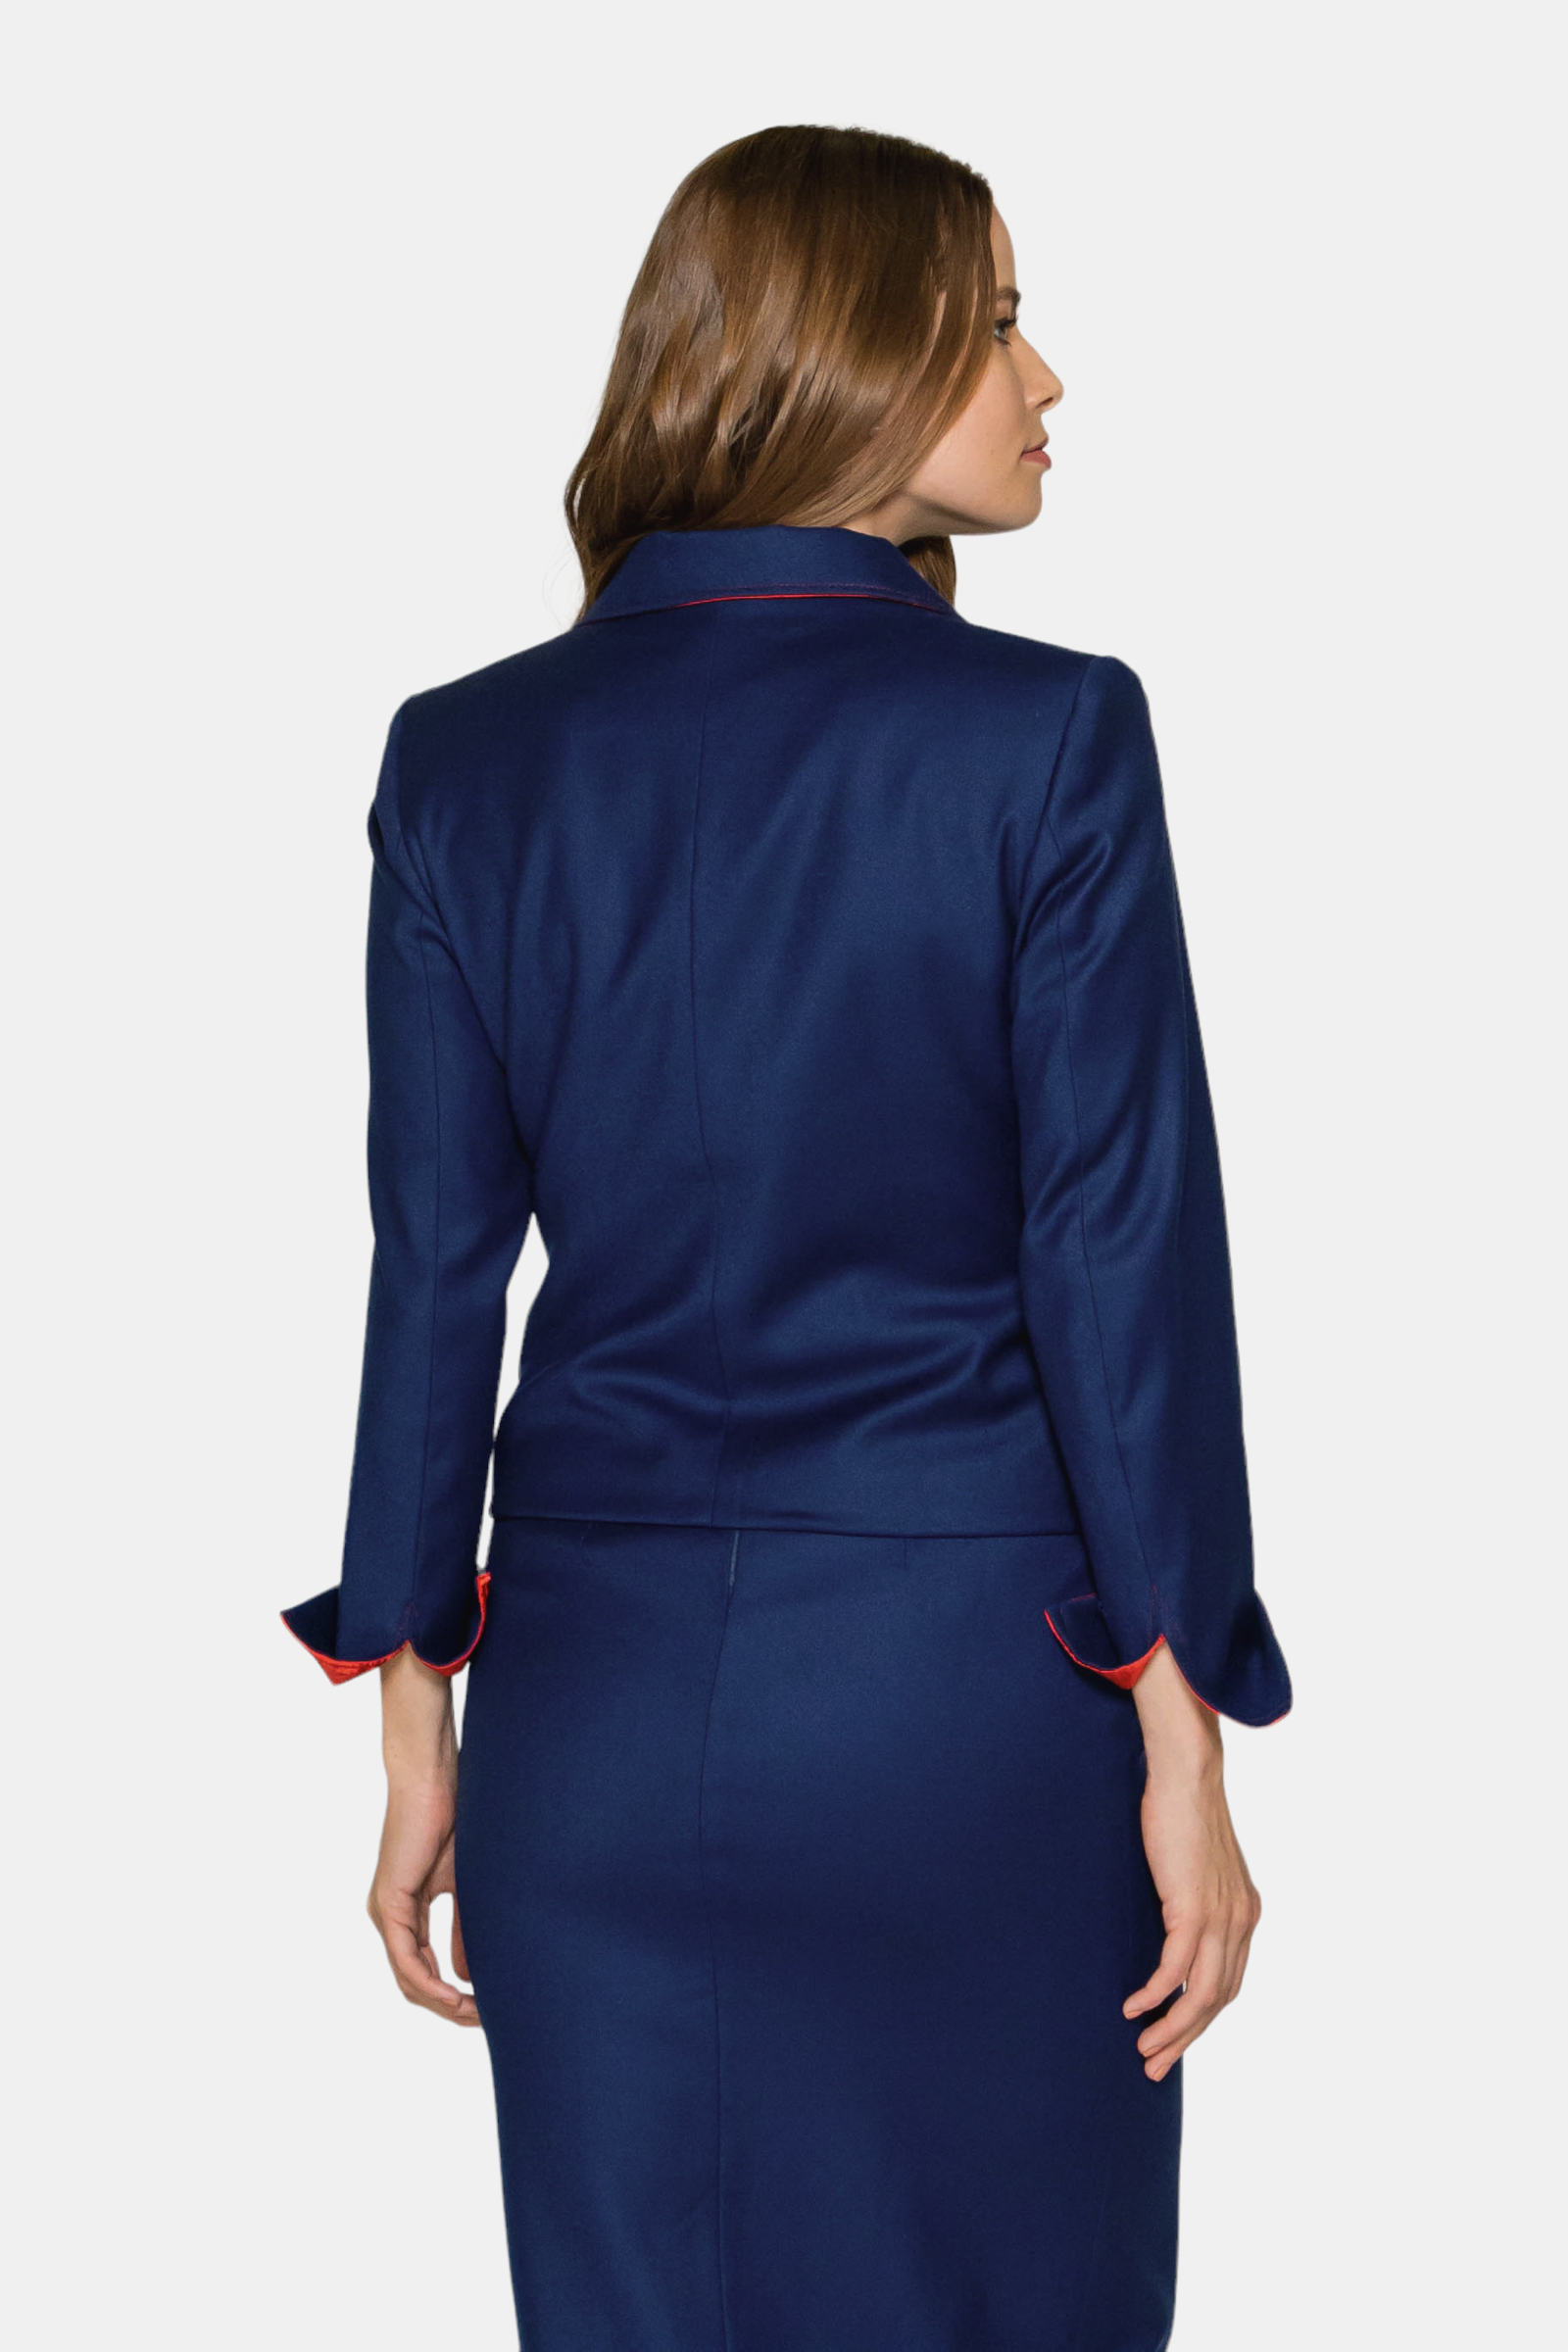 Sara Sabella 2-Piece Set Navy Blue Jacket & Midi Skirt Suit Set Back View- Made in Italy Women's Suit Clothing